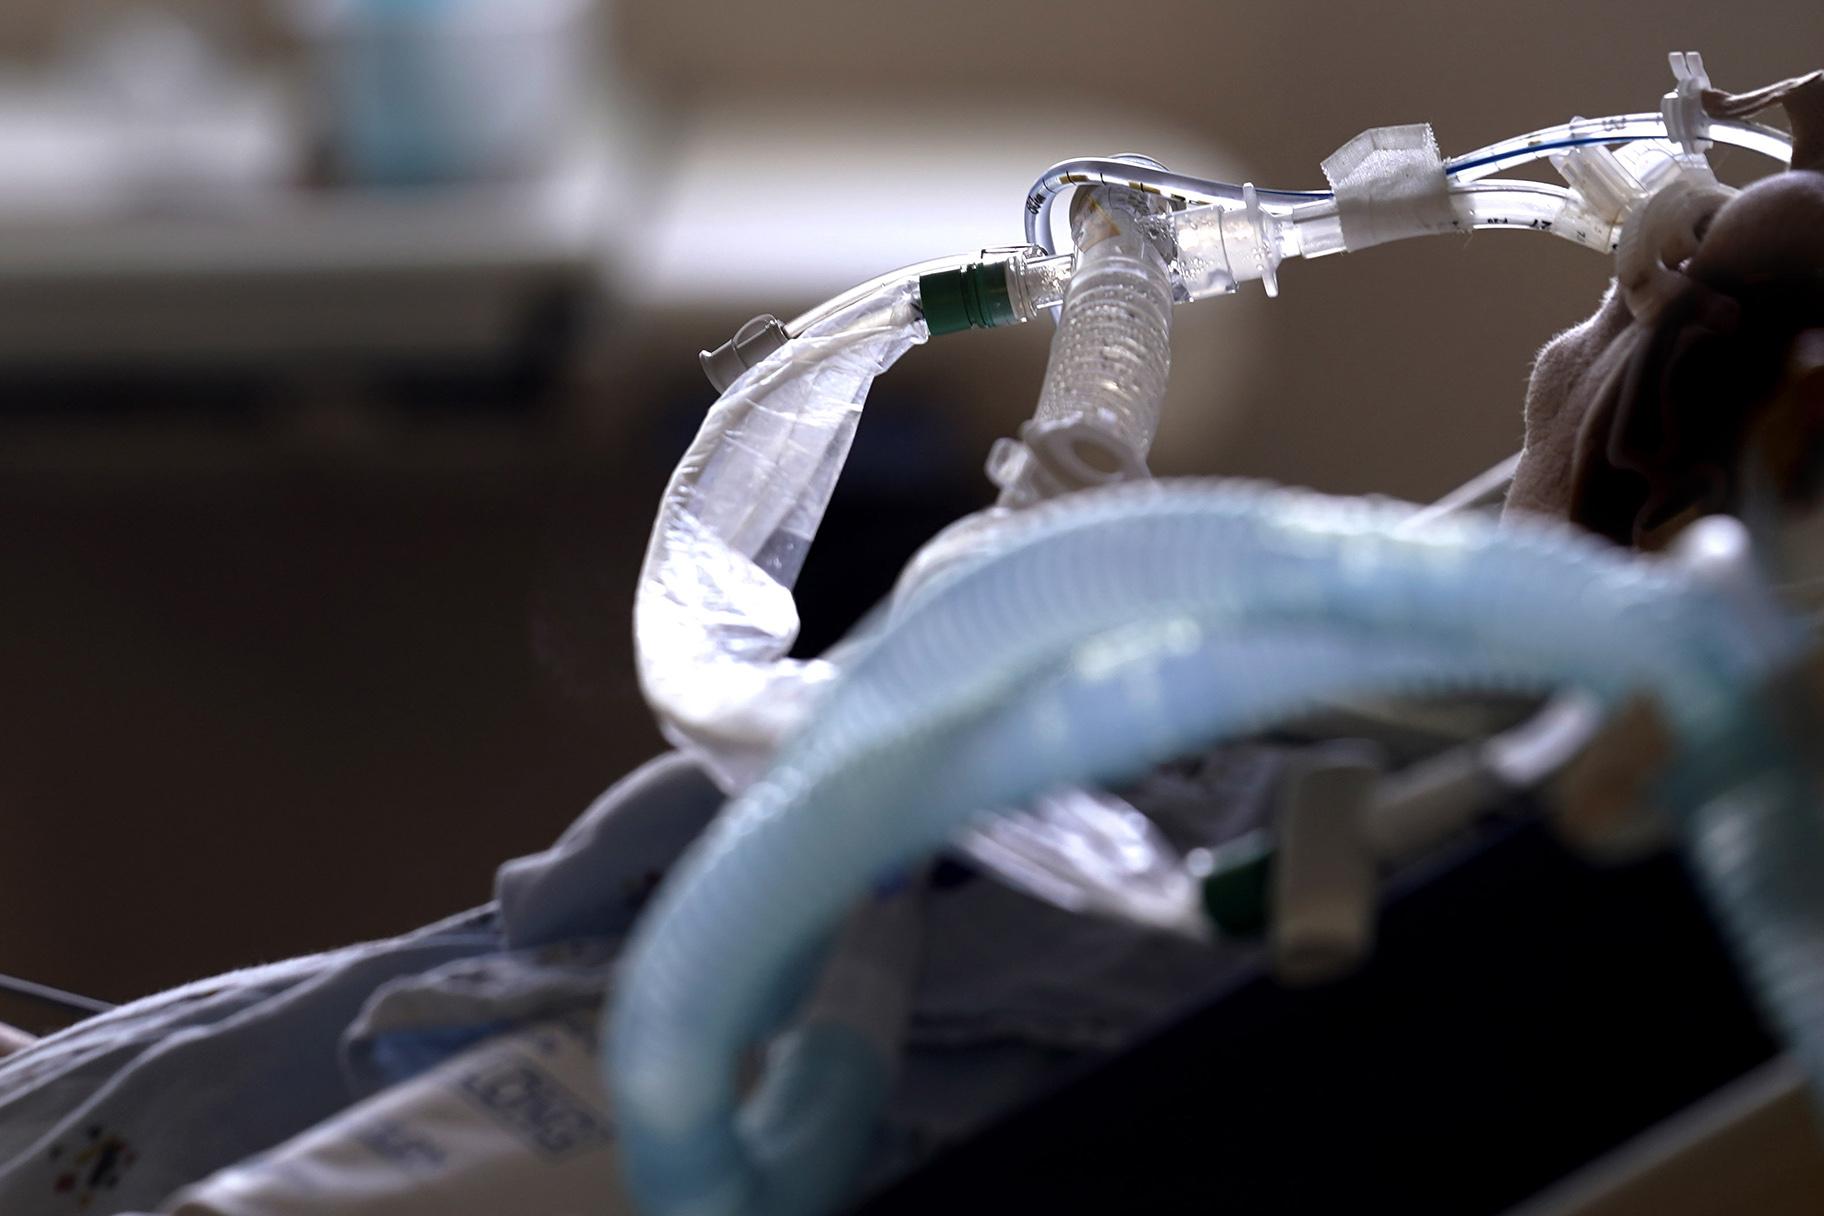 A patient with COVID-19 on breathing support lies in a bed in an intensive care unit at the Willis-Knighton Medical Center in Shreveport, La., Tuesday, Aug. 17, 2021. (AP Photo / Gerald Herbert)